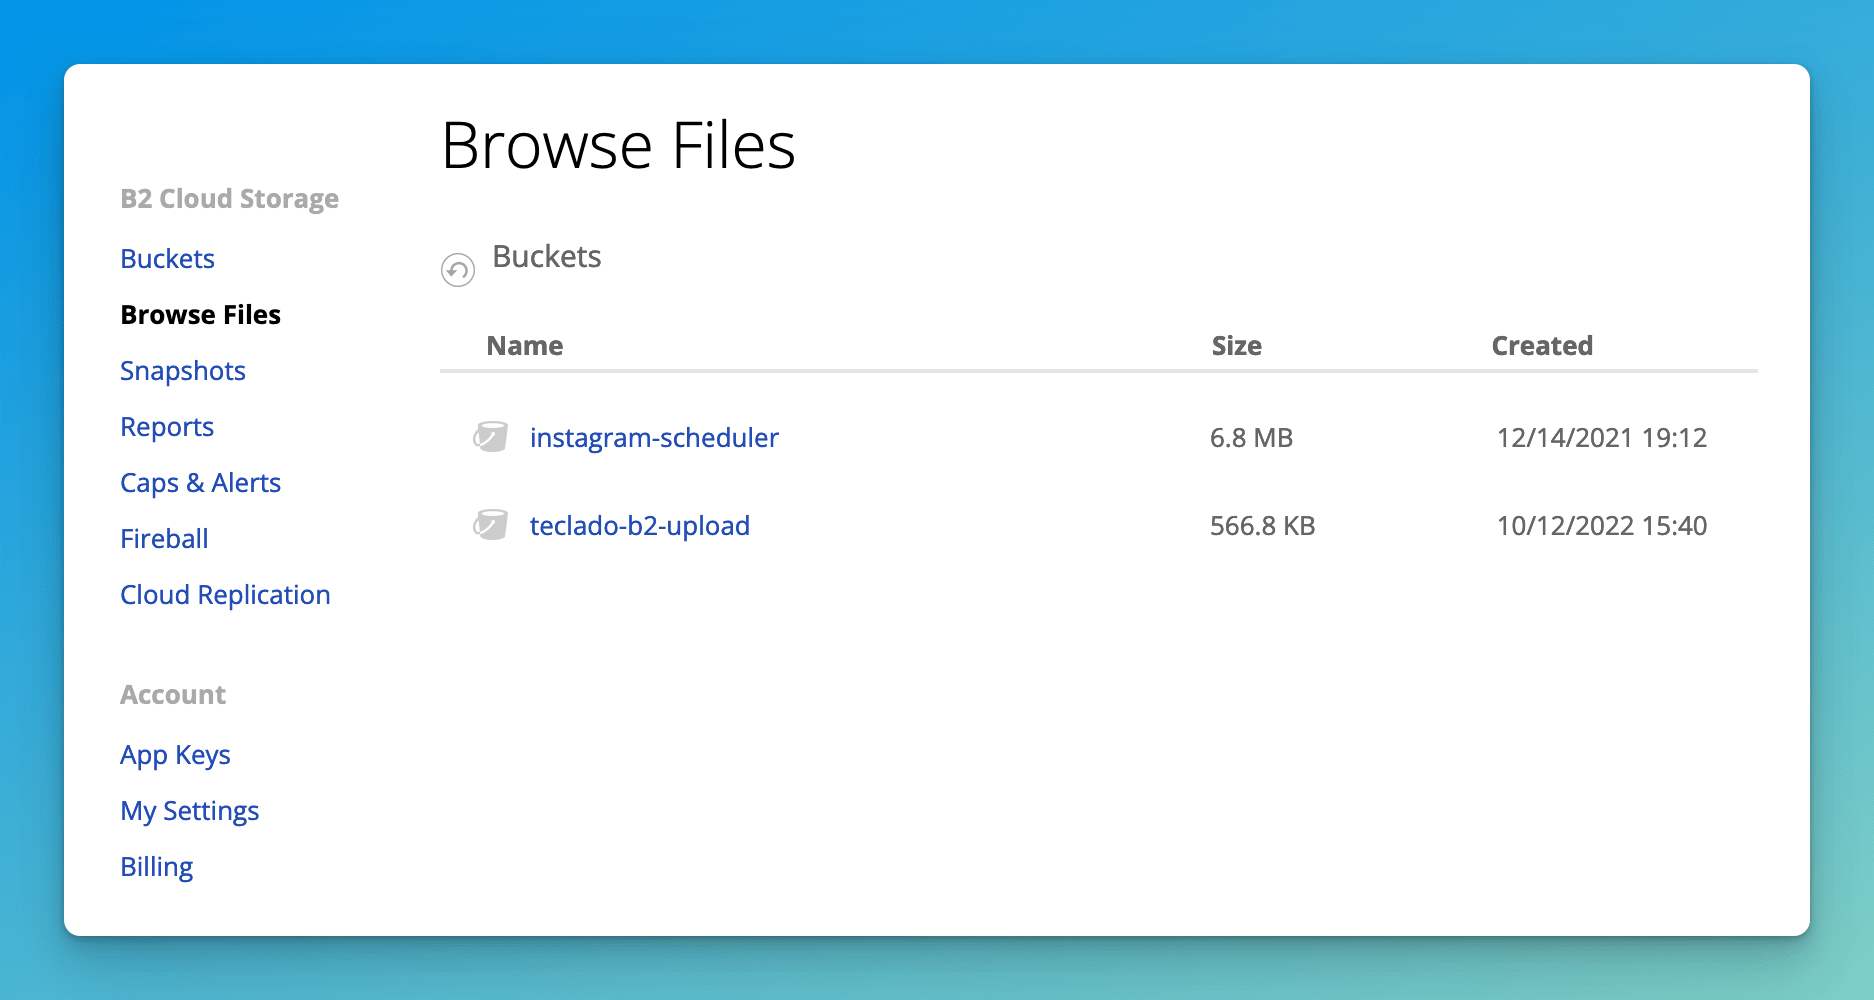 Screenshot showing Browse Files and the available buckets in your account